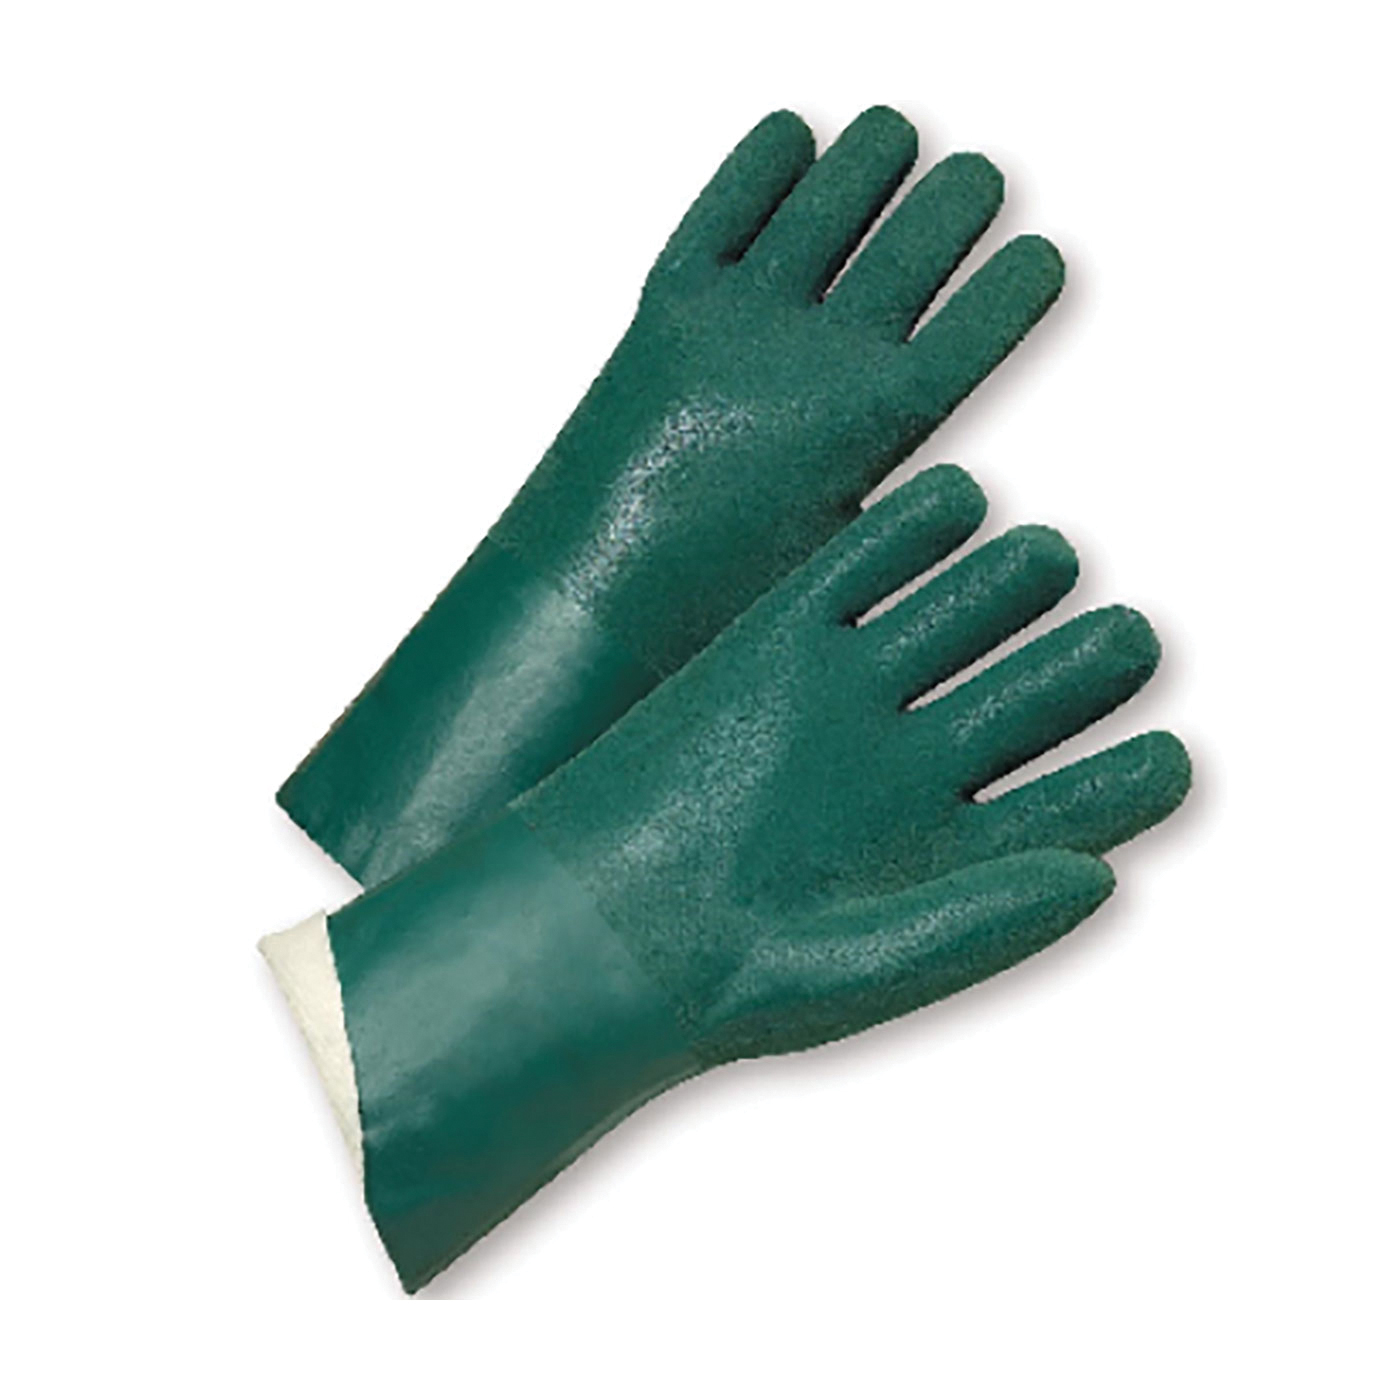 PIP® J1247RF Standard Chemical-Resistant Gloves, SZ 14, Pair Hand, Green, Jersey Lining, 14 in L, Resists: Abrasion, Acid, Chemical, Grease, Oil, Water and Solvent, Supported Support, Gauntlet Cuff